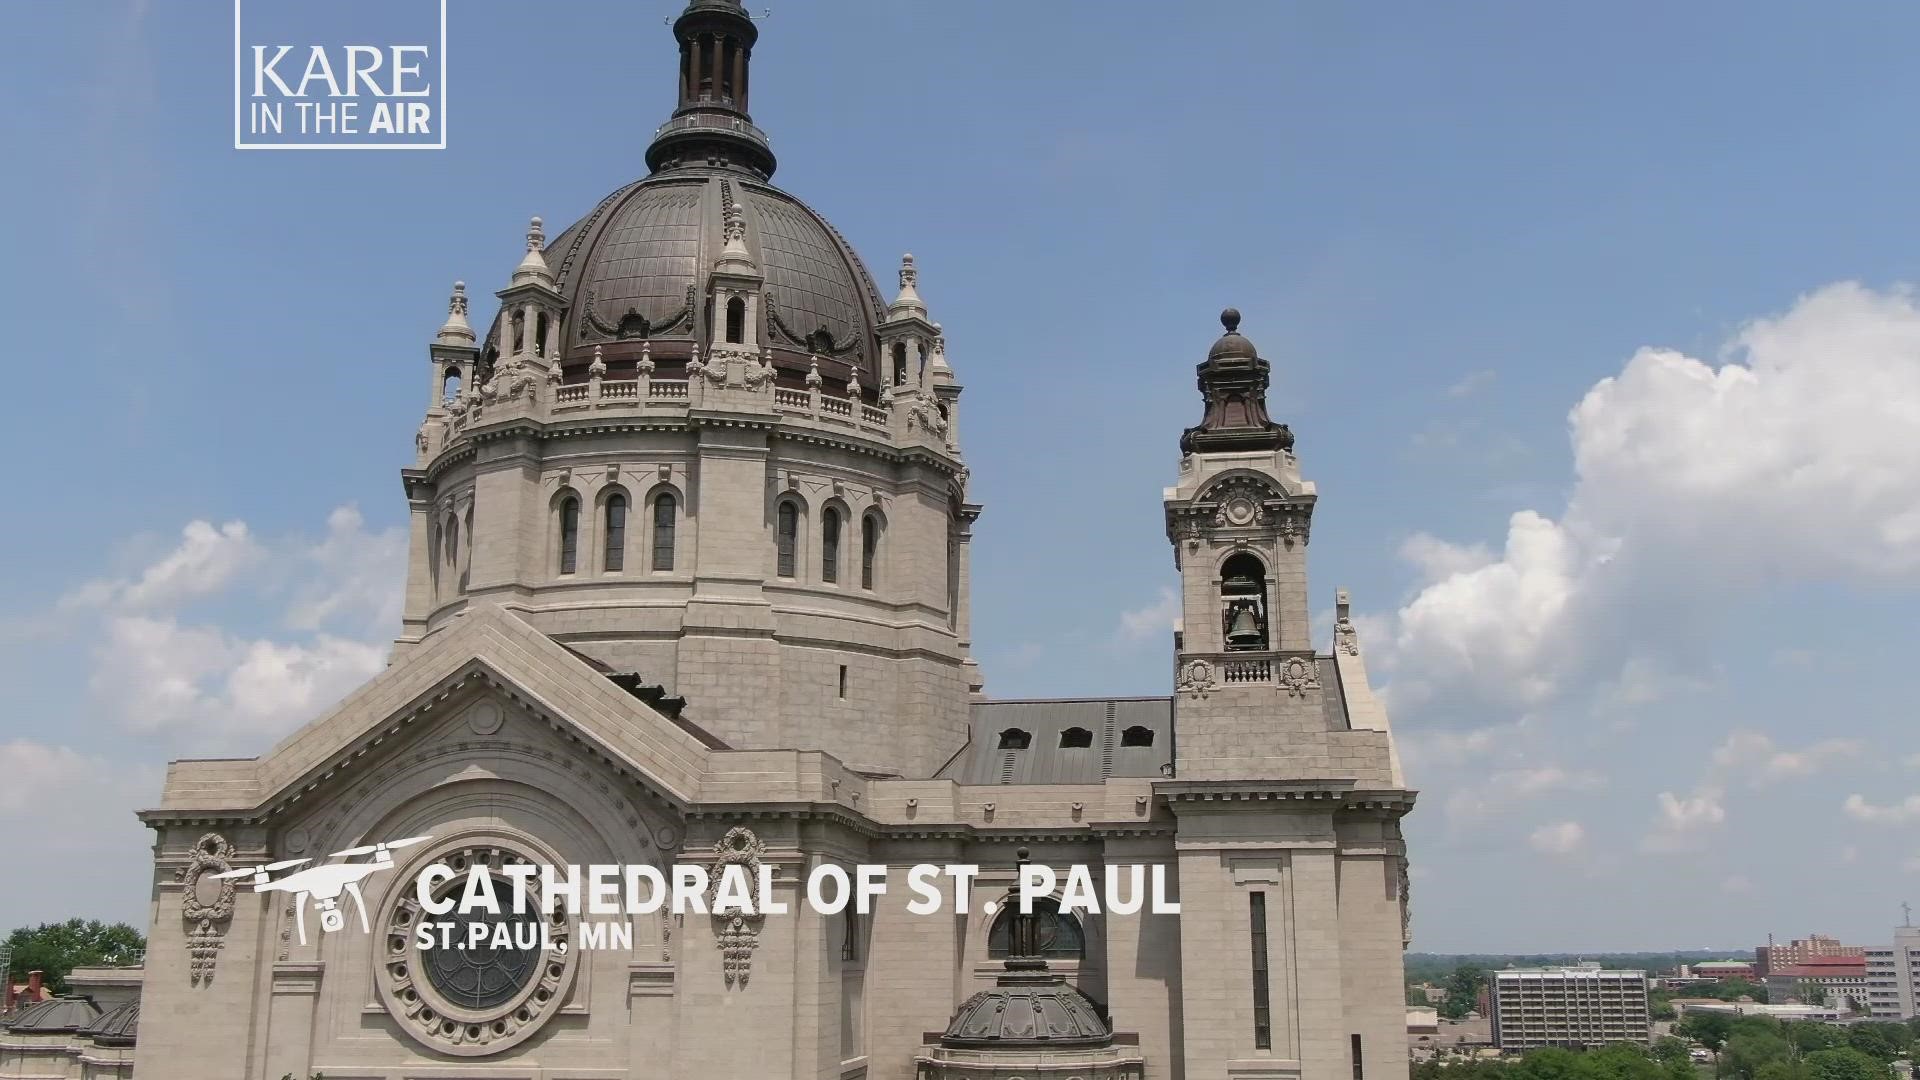 Our drone series takes us over this grand worship space, finished in 1915 and now designated as the first national shrine in honor of the Apostle Paul.